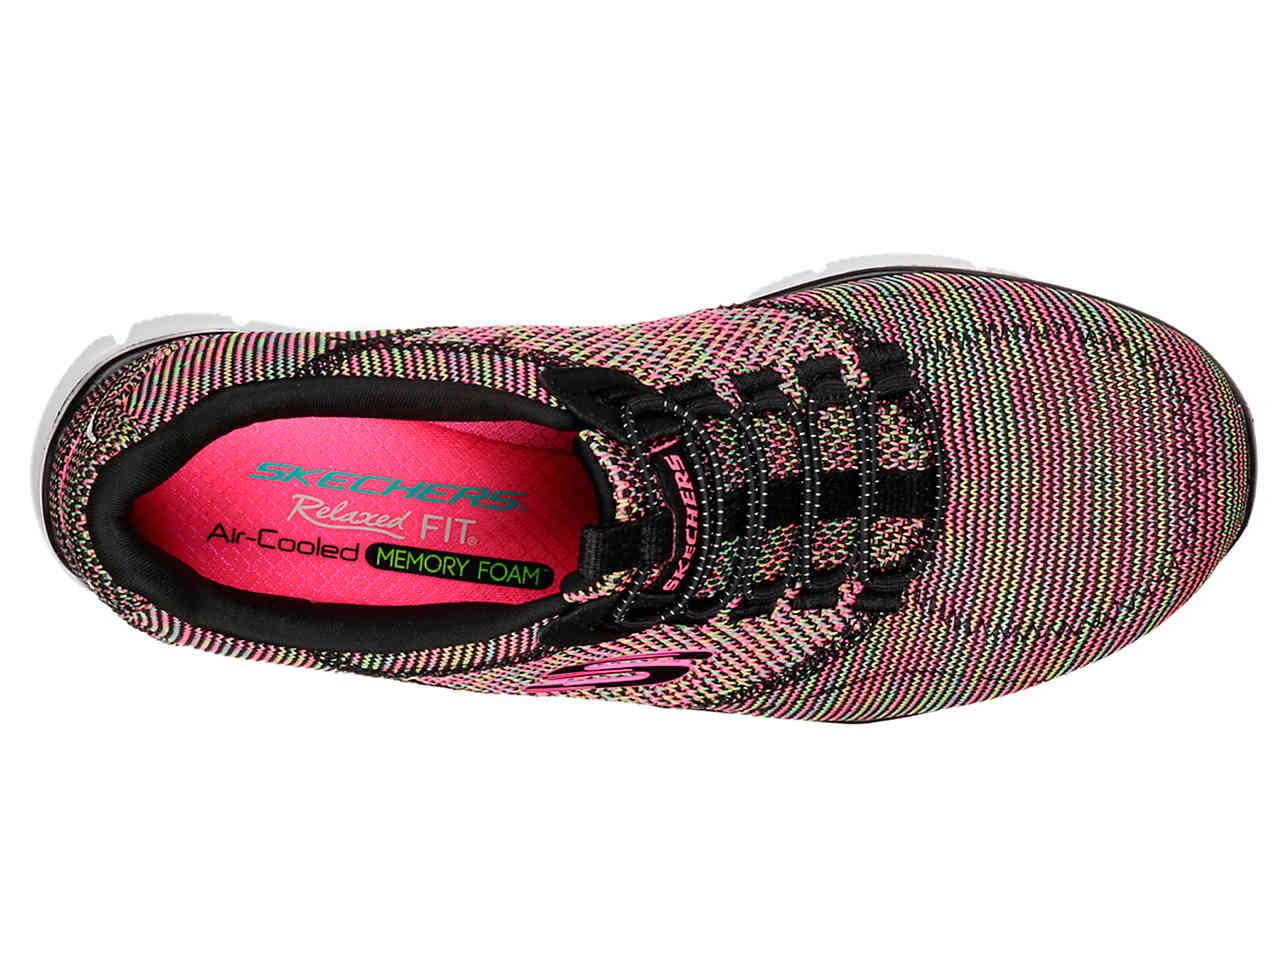 skechers relaxed fit noteworthy